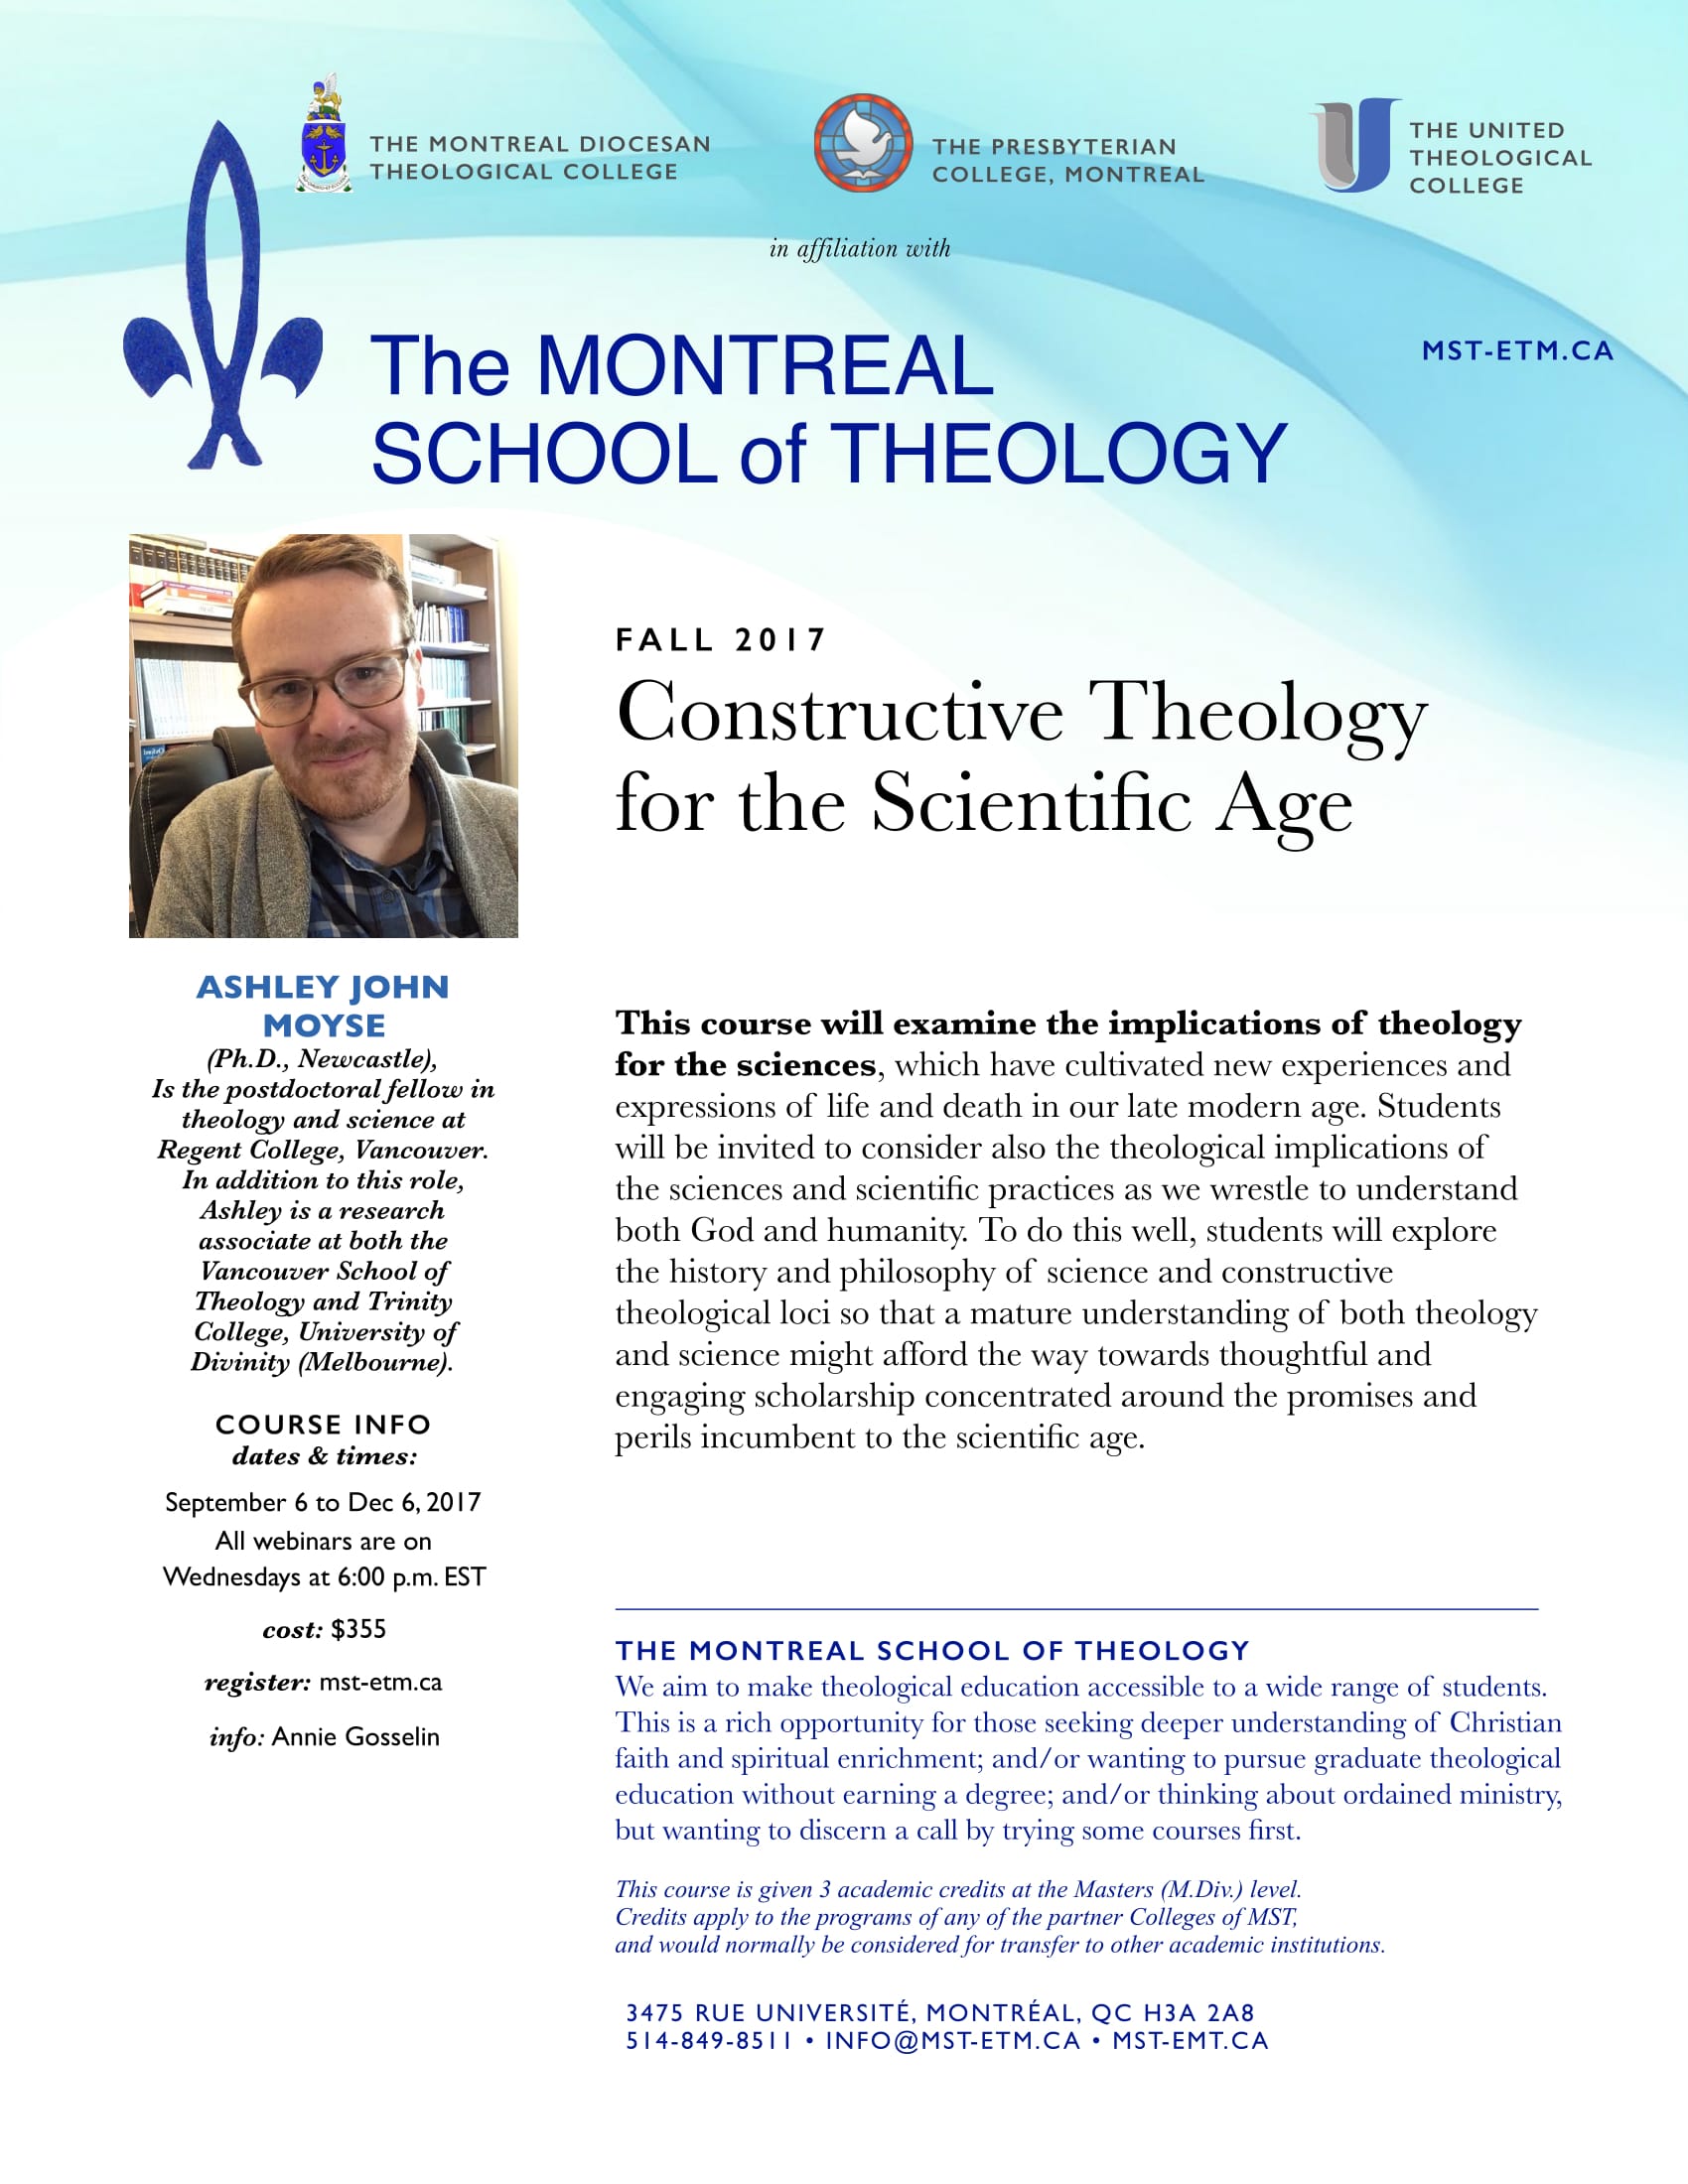 Constructive Theology for the Scientific Age- on-line credit course offered fall 2017